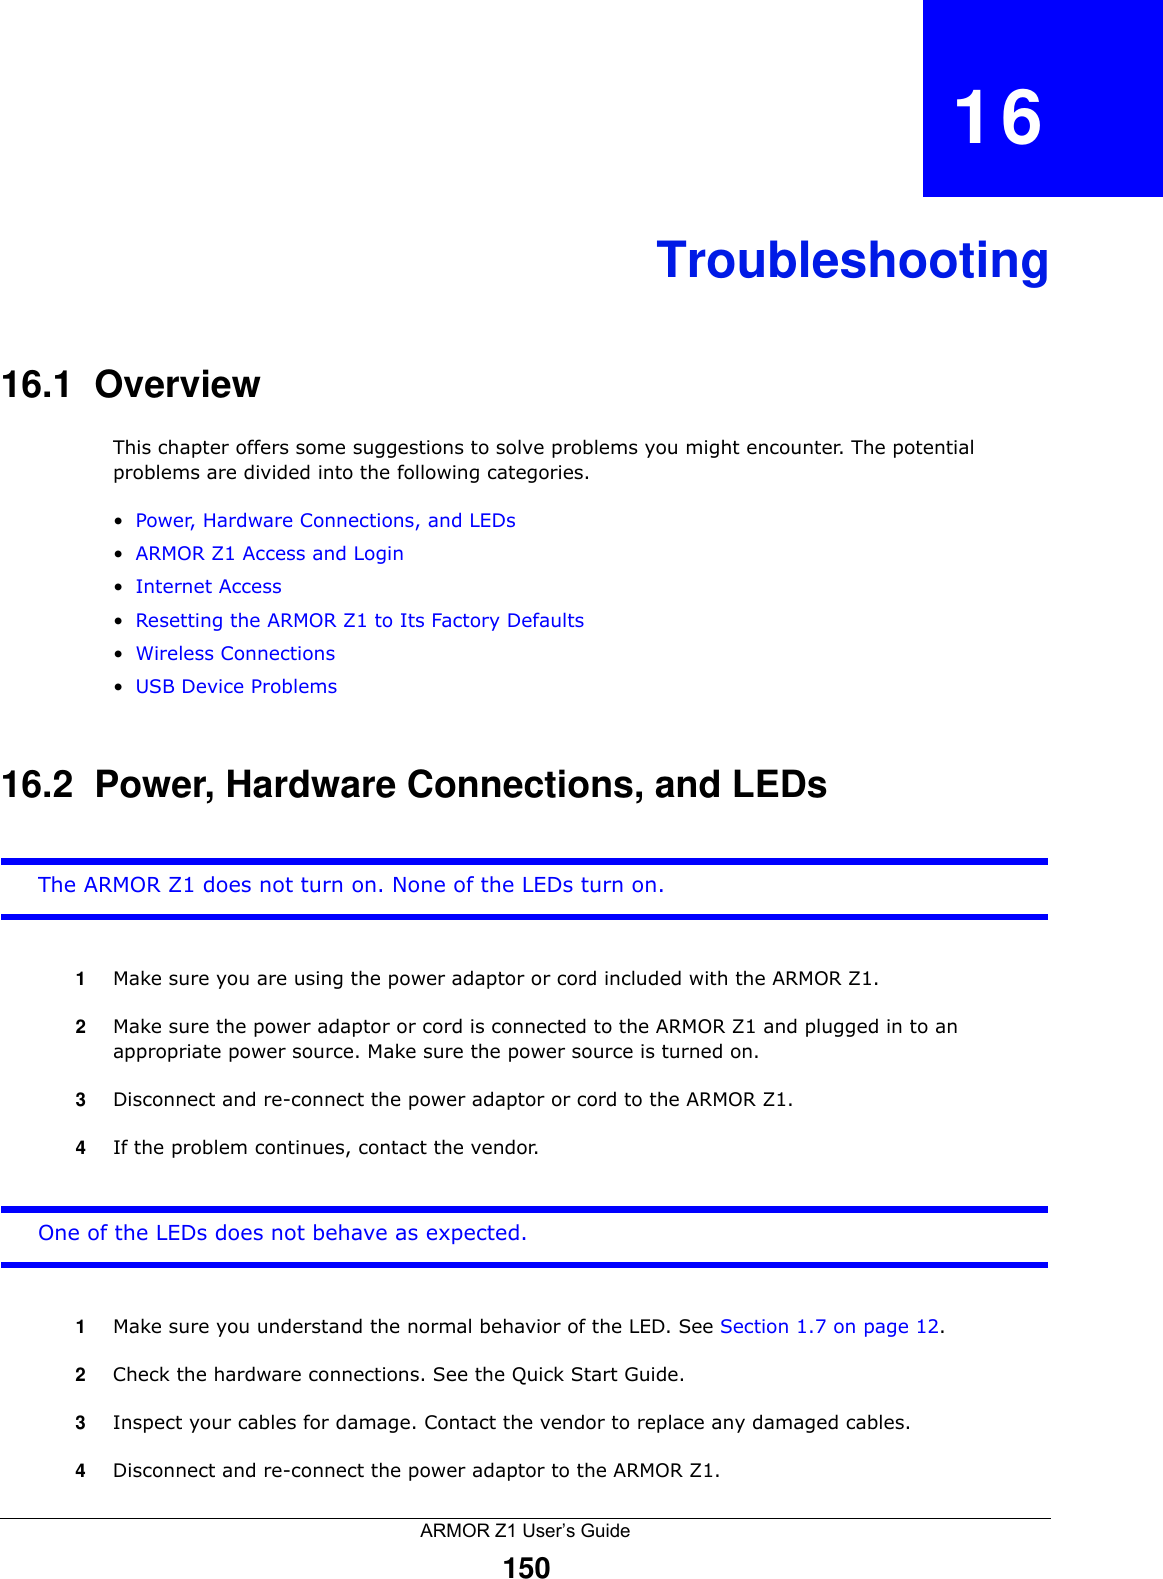 ARMOR Z1 User’s Guide150CHAPTER   16Troubleshooting16.1  OverviewThis chapter offers some suggestions to solve problems you might encounter. The potential problems are divided into the following categories. •Power, Hardware Connections, and LEDs•ARMOR Z1 Access and Login•Internet Access•Resetting the ARMOR Z1 to Its Factory Defaults•Wireless Connections•USB Device Problems16.2  Power, Hardware Connections, and LEDsThe ARMOR Z1 does not turn on. None of the LEDs turn on.1Make sure you are using the power adaptor or cord included with the ARMOR Z1.2Make sure the power adaptor or cord is connected to the ARMOR Z1 and plugged in to an appropriate power source. Make sure the power source is turned on.3Disconnect and re-connect the power adaptor or cord to the ARMOR Z1.4If the problem continues, contact the vendor.One of the LEDs does not behave as expected.1Make sure you understand the normal behavior of the LED. See Section 1.7 on page 12.2Check the hardware connections. See the Quick Start Guide. 3Inspect your cables for damage. Contact the vendor to replace any damaged cables.4Disconnect and re-connect the power adaptor to the ARMOR Z1. 